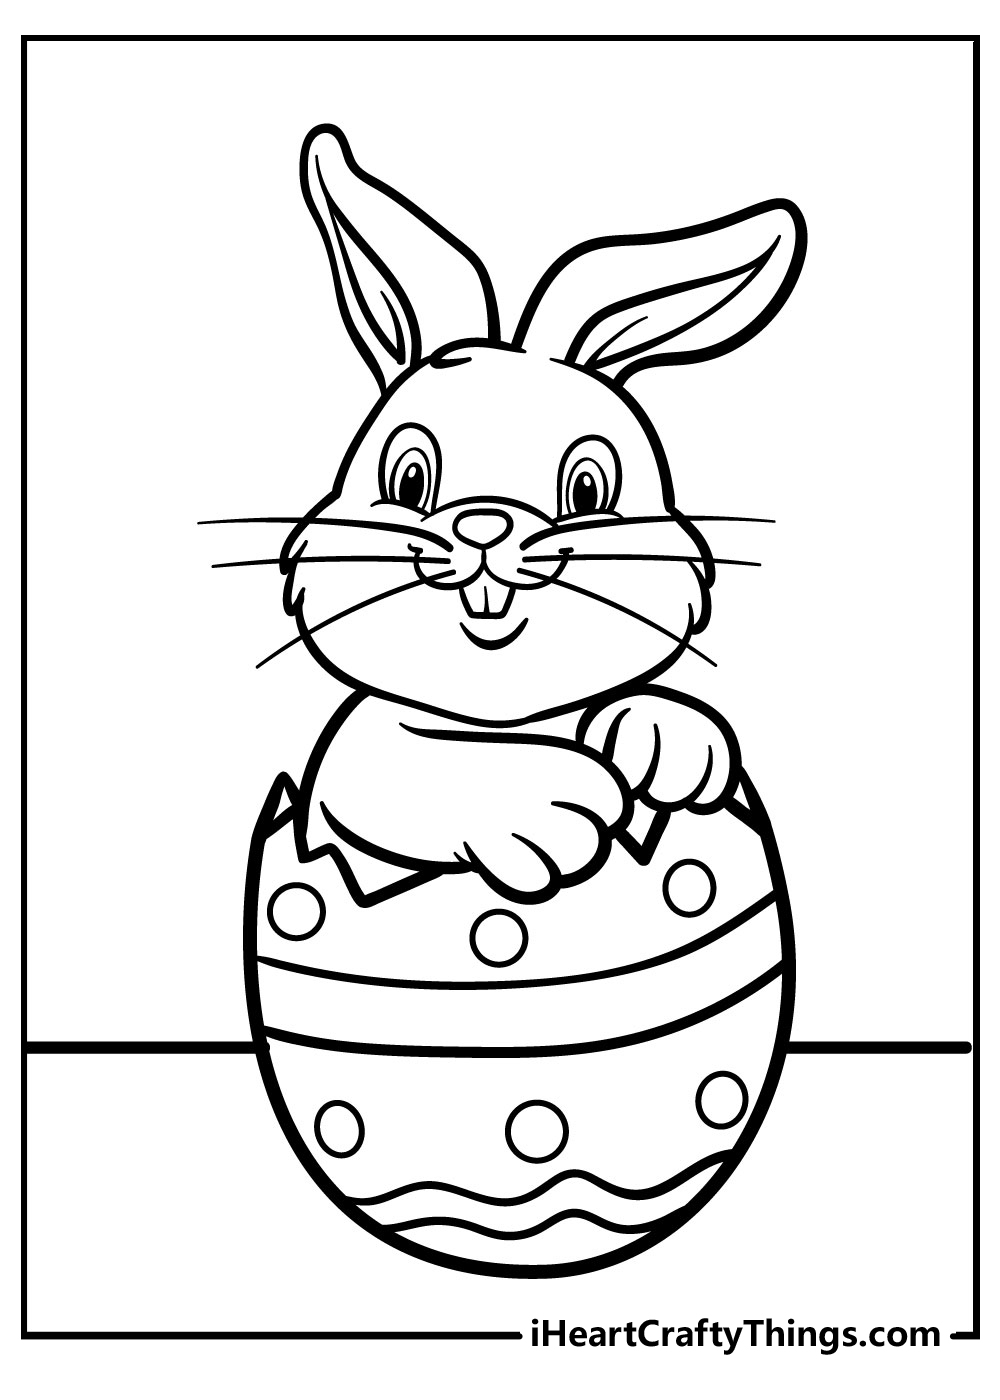 Easter Bunny Coloring Pages Updated 21